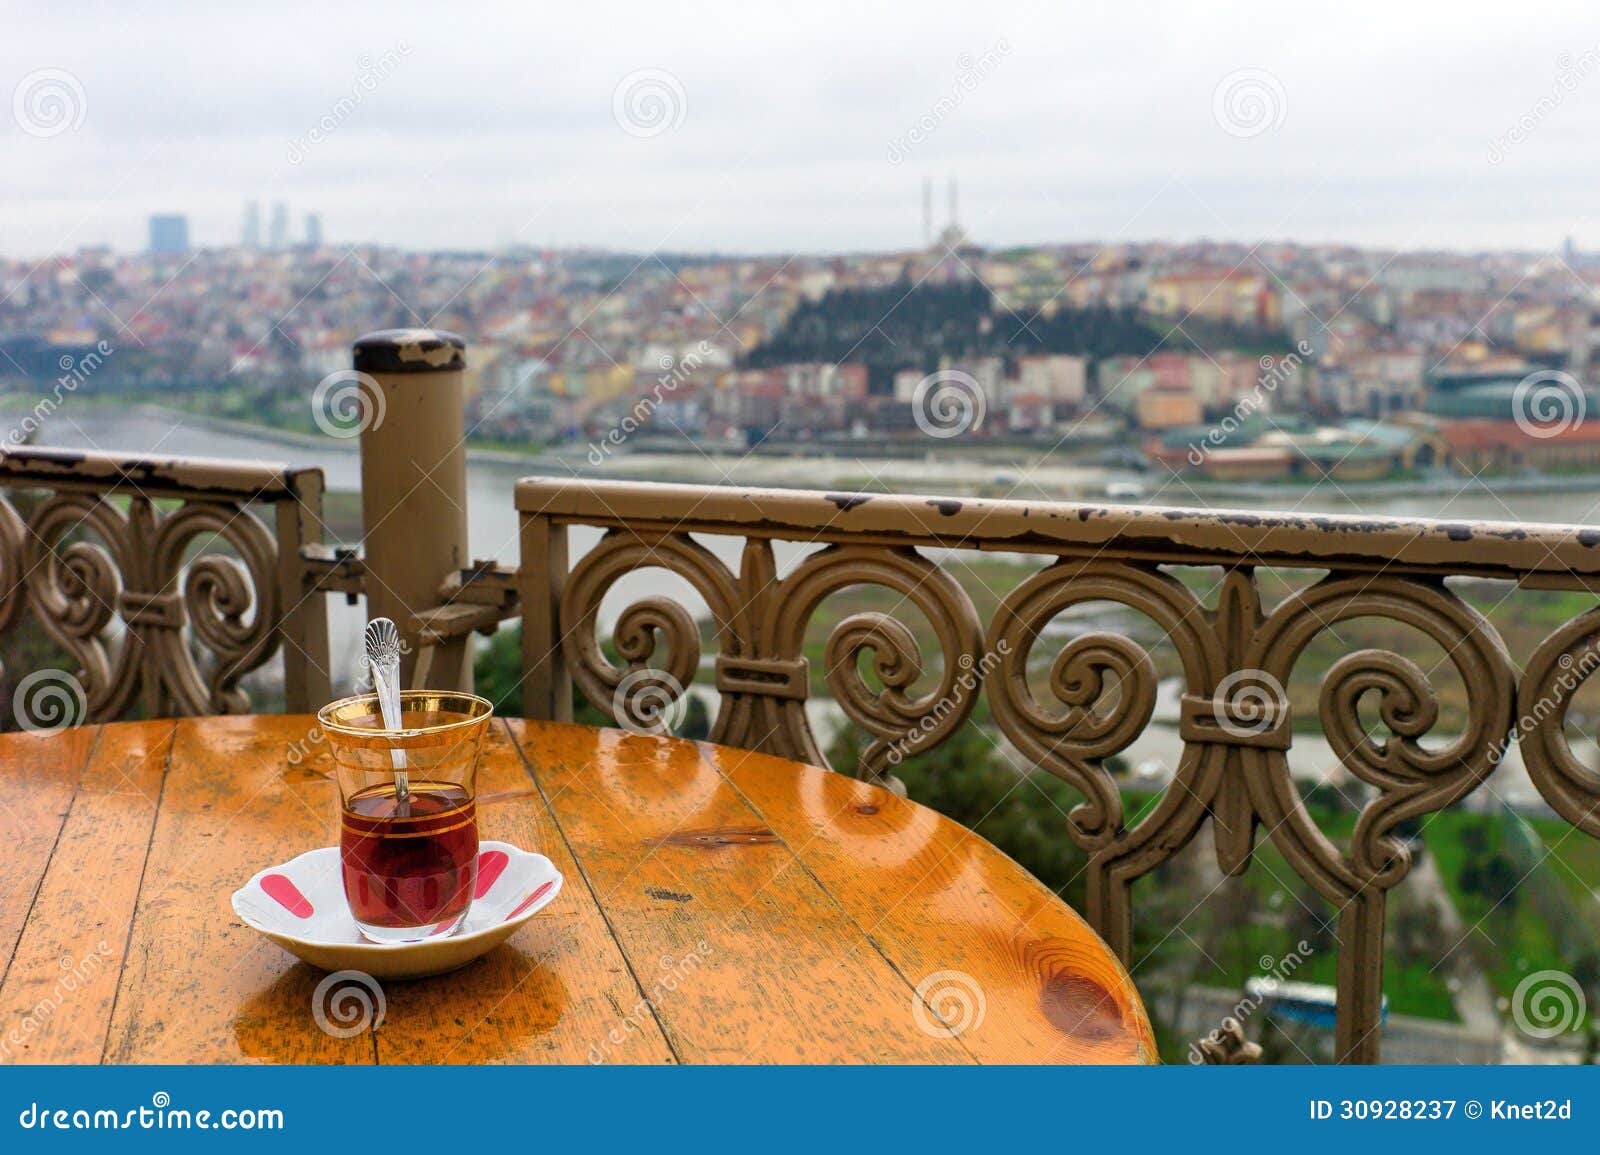 overview of istanbul from pierre loti cafe